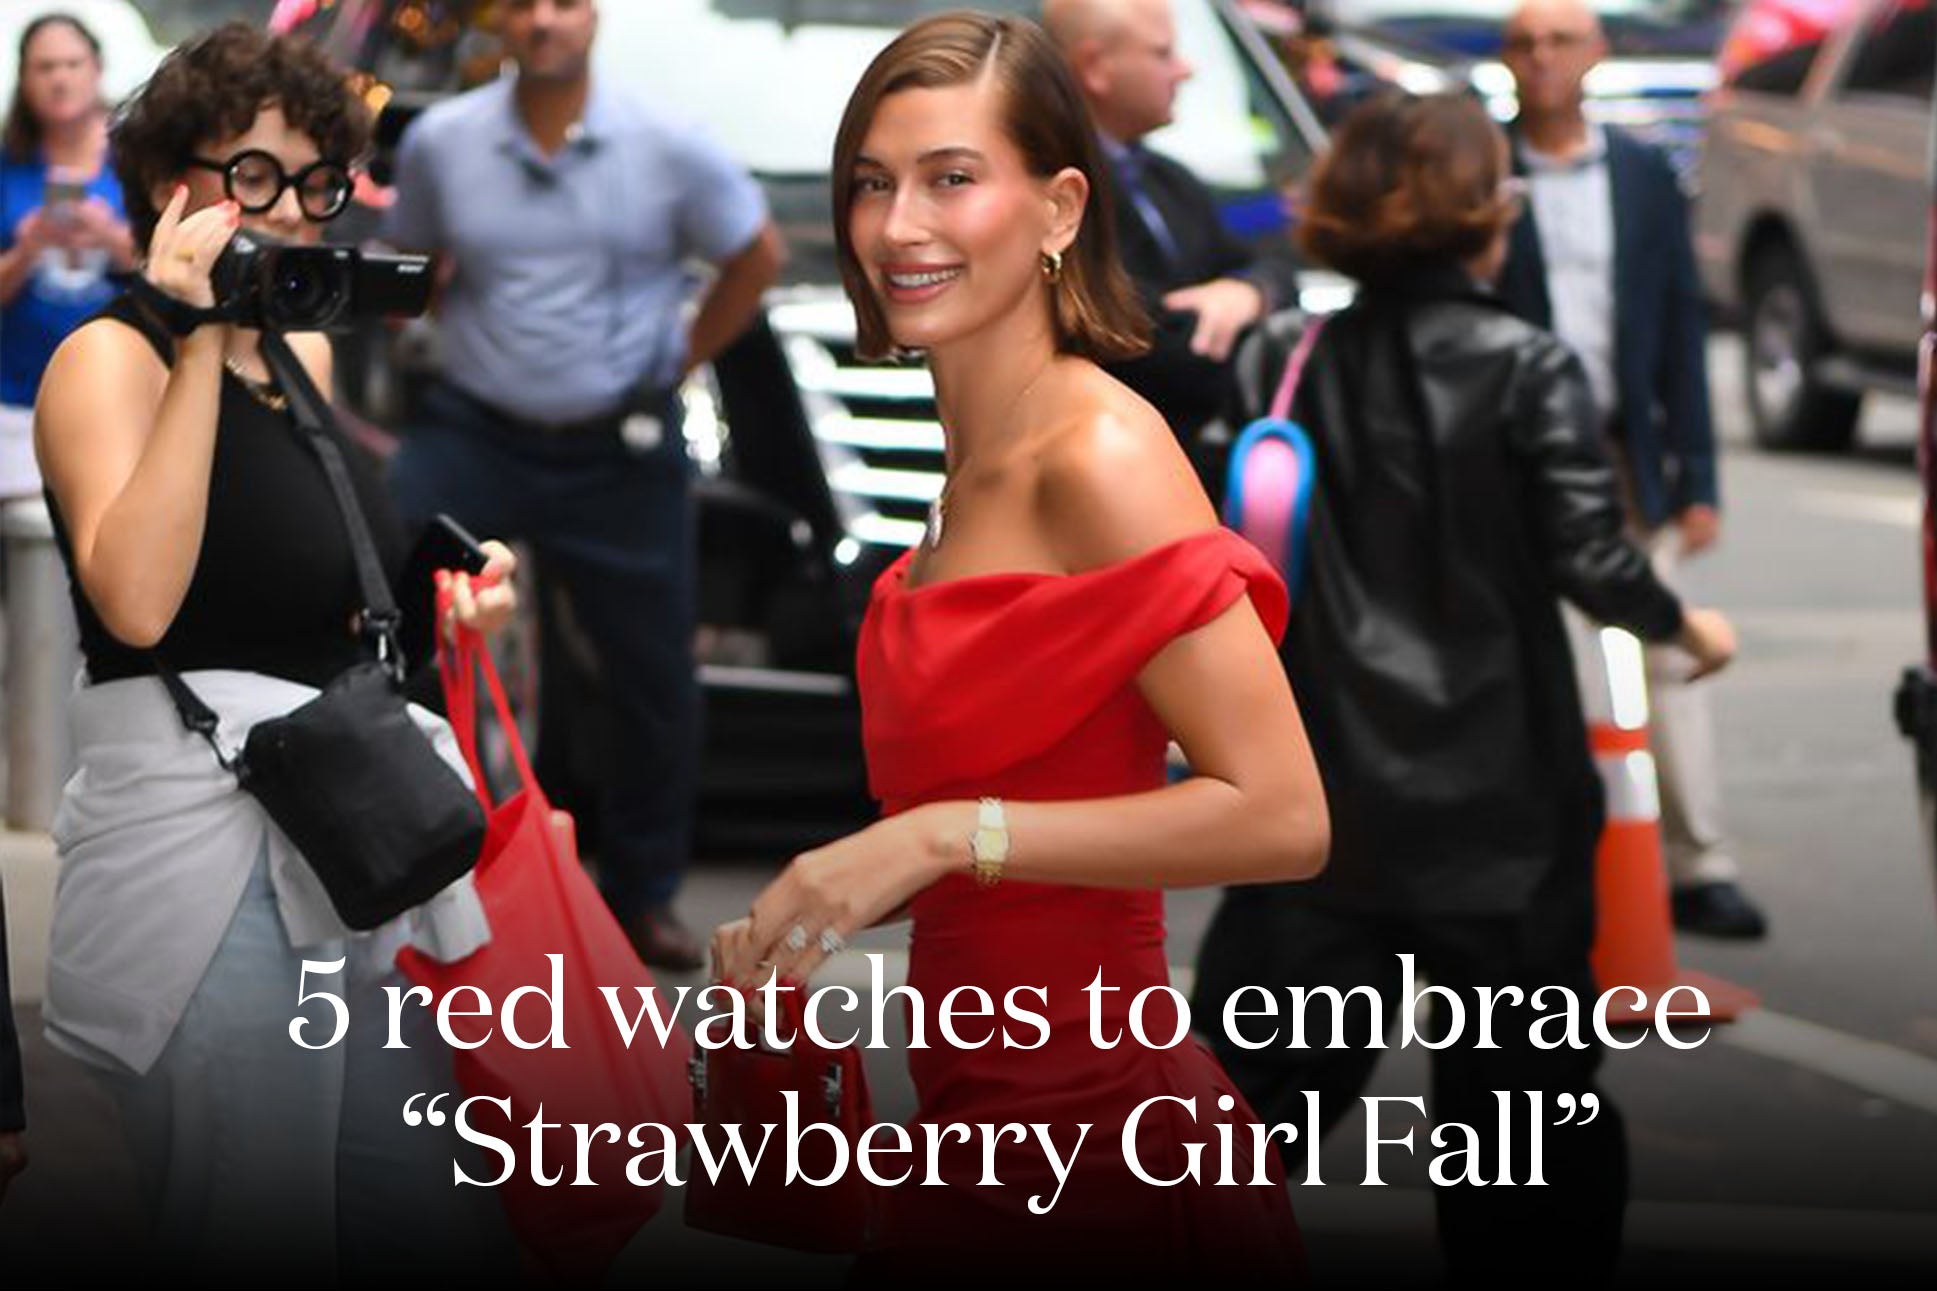 5 Red Watches to Embrace Strawberry Girl Fall